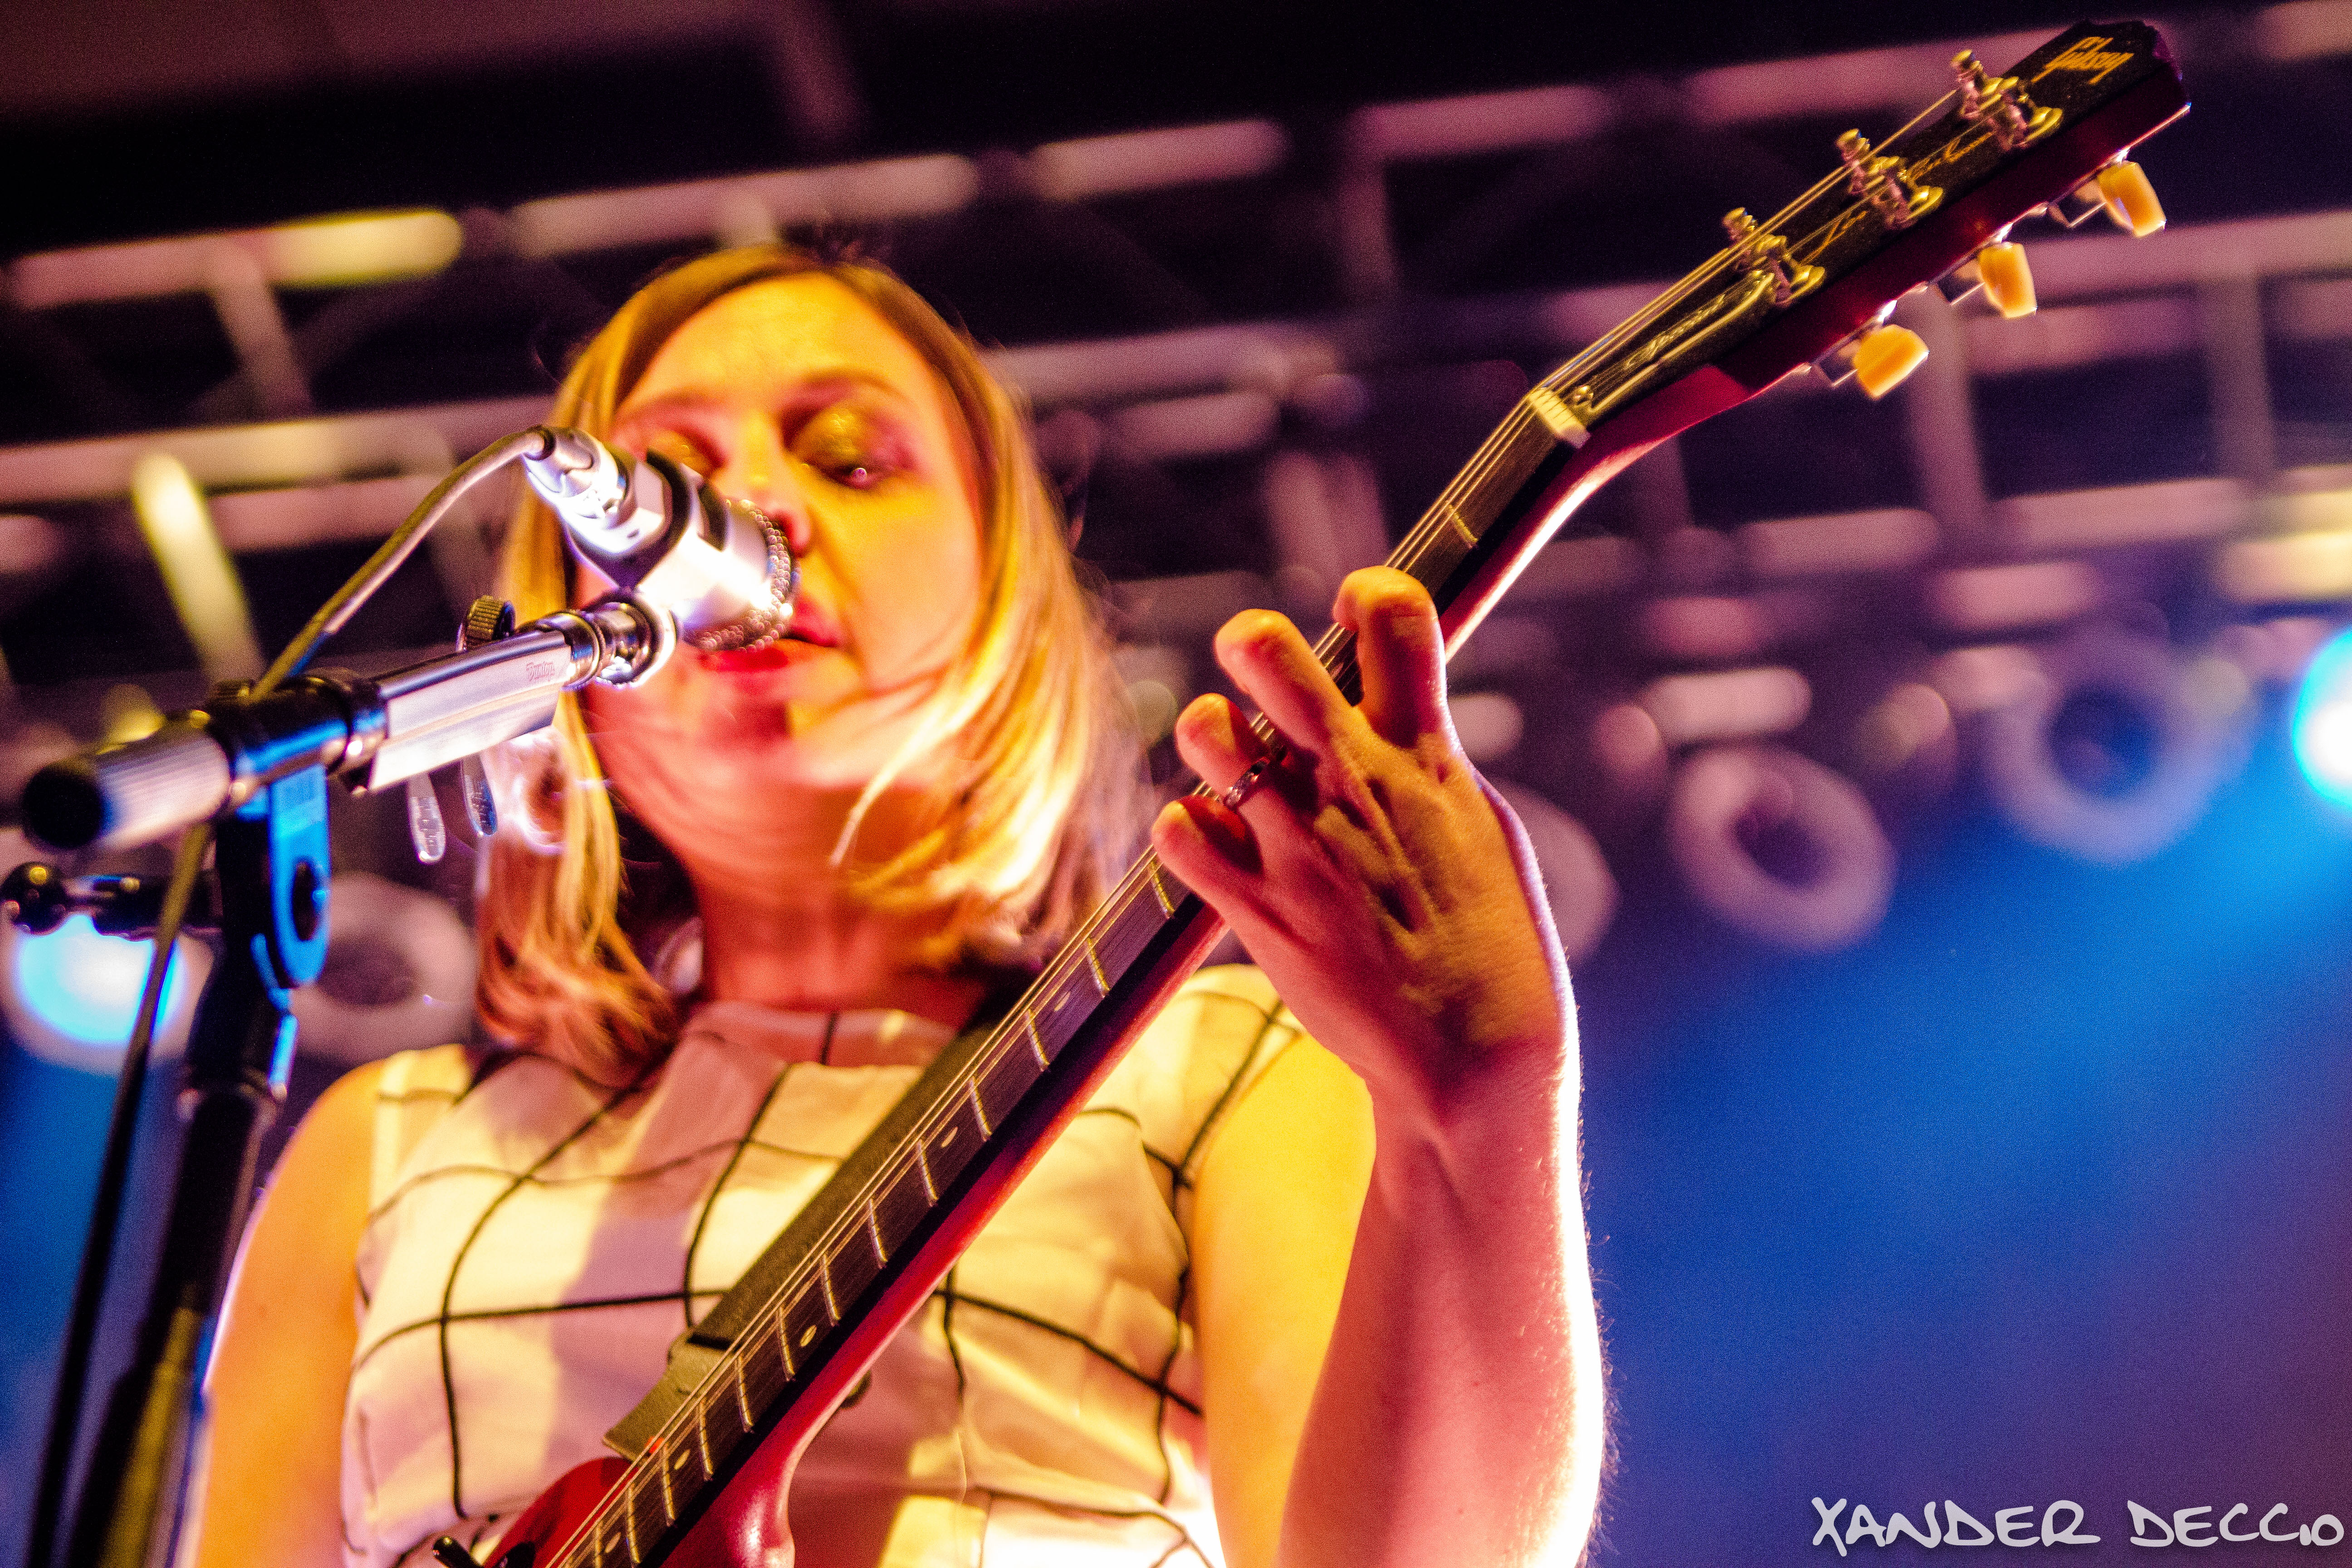 Sleater-Kinney @ The Knitting Factory (Photo By Xander Deccio)